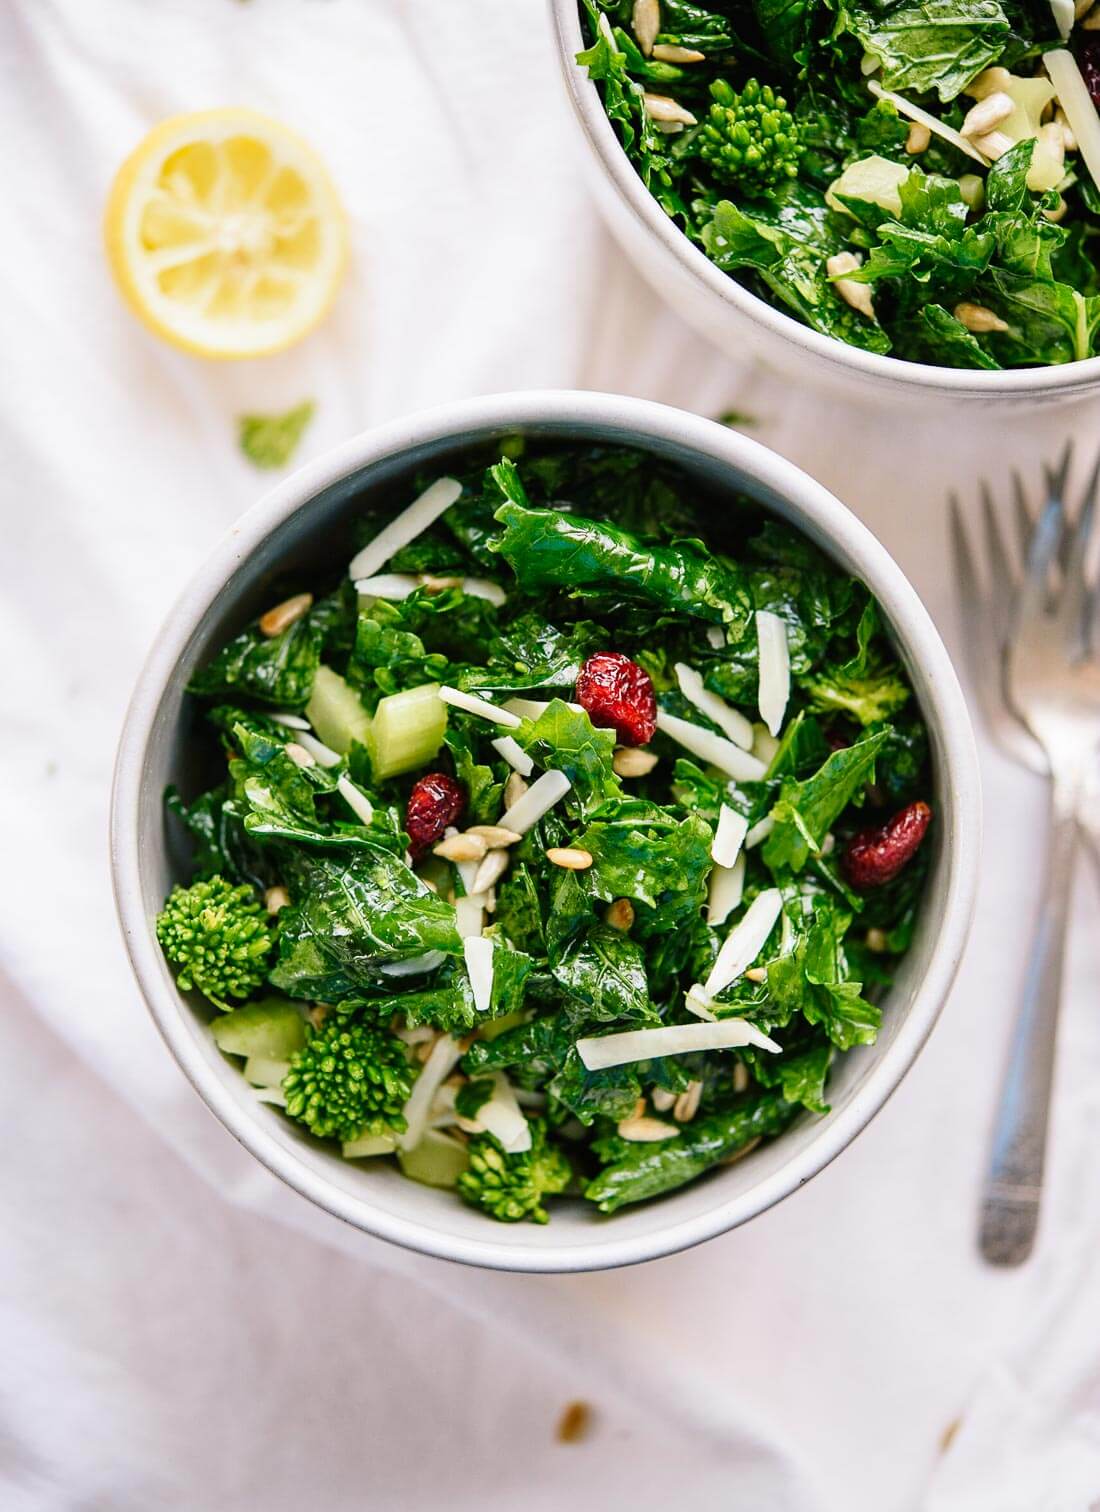 Raw broccoli rabe, once massaged with a lemony, garlicky dressing, transforms into a delicious salad green. cookieandkate.com